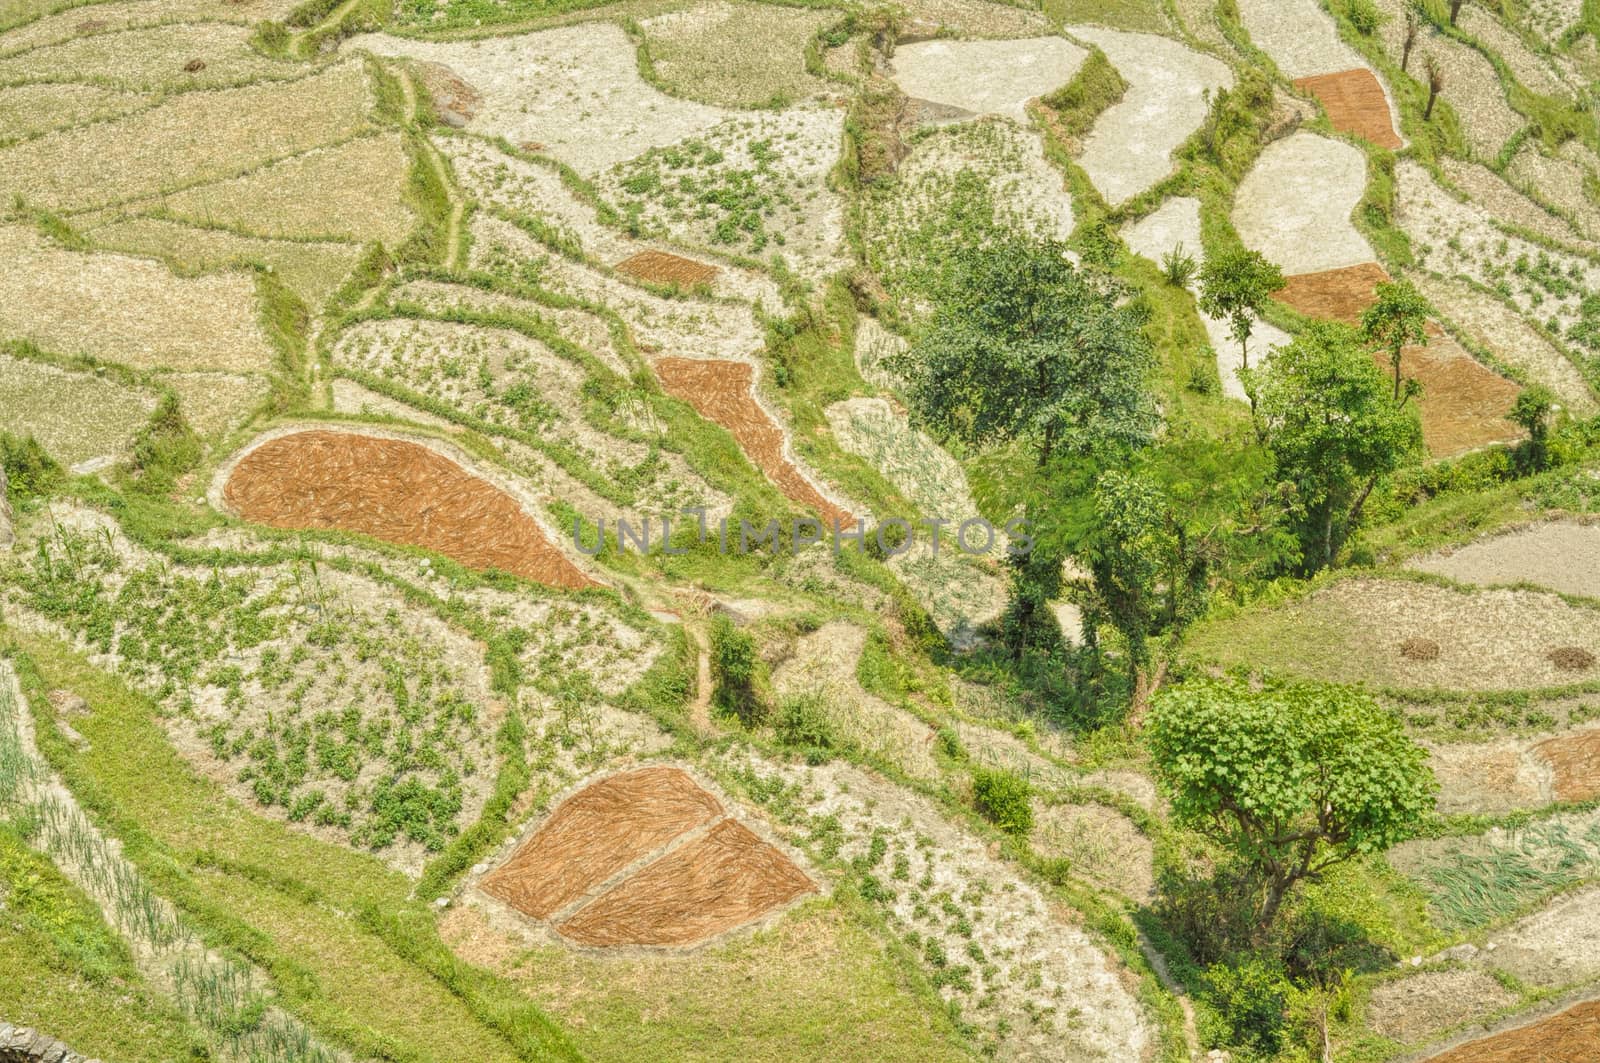 Picturesque view of terraced fields in Nepal from the top